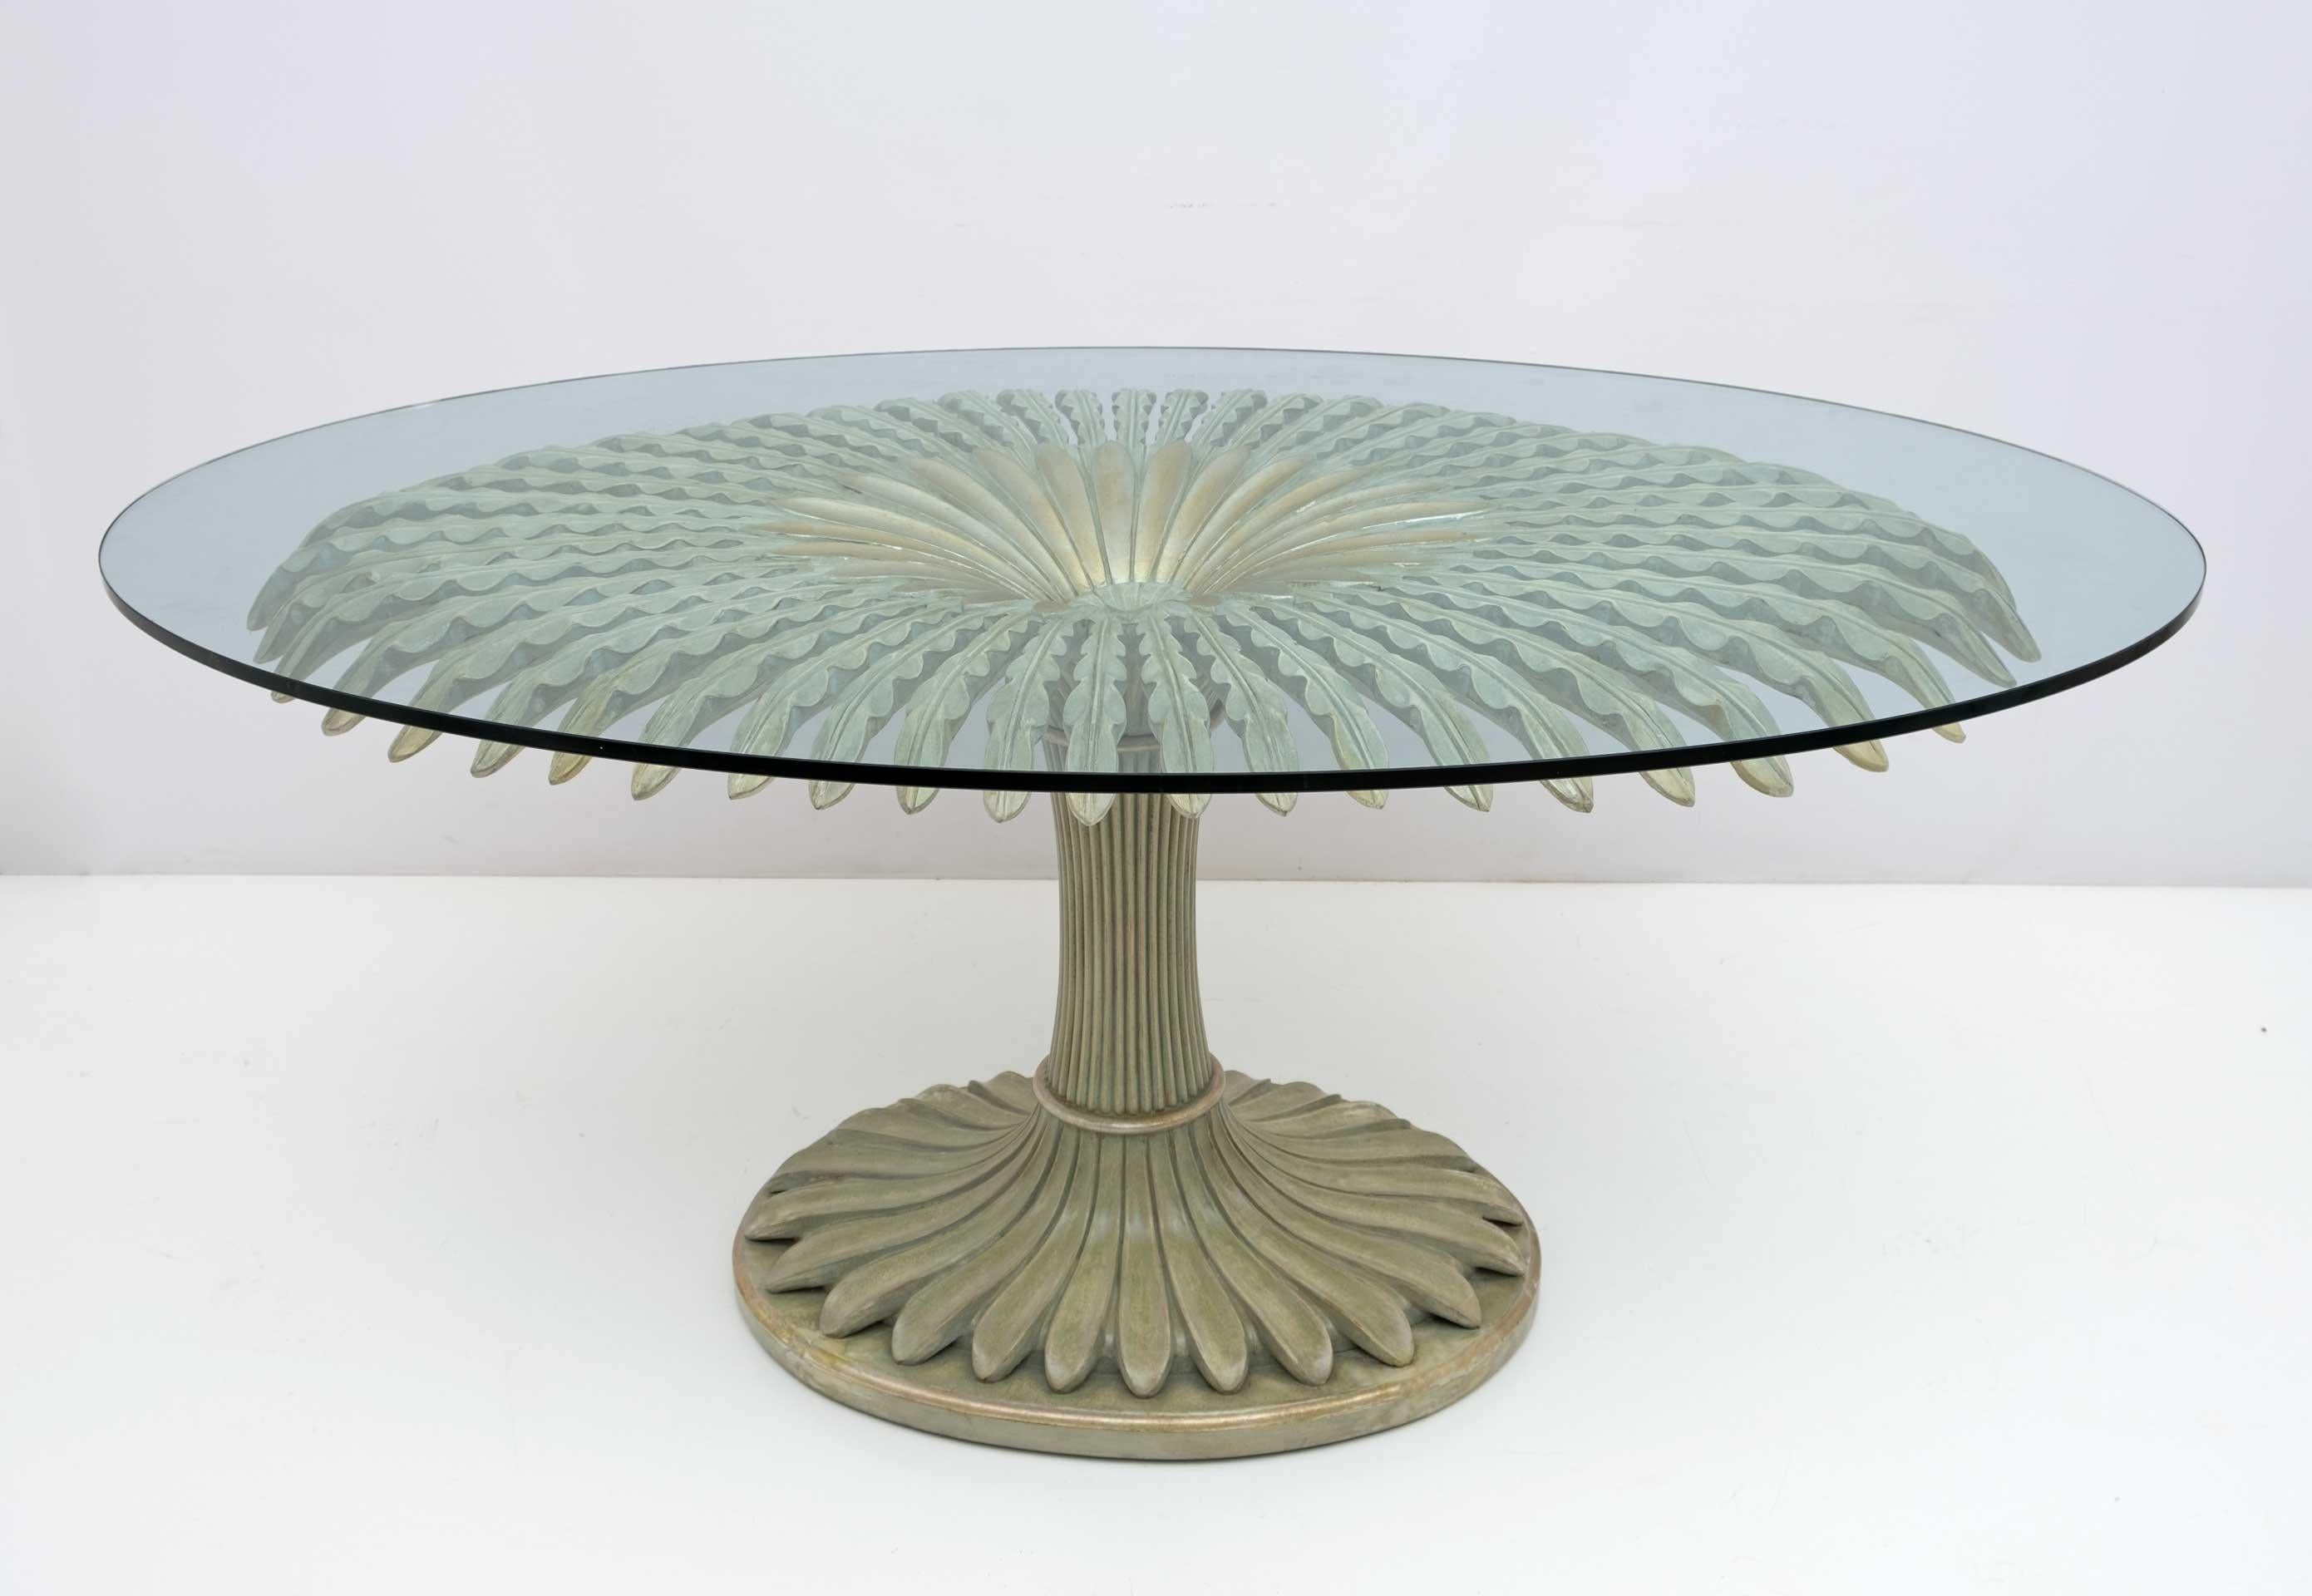 Spectacular dining or center table in finely carved ivory lacquered gilded wood of Italian design with oval crystal top. Attributed to Pier Luigi Colli.
